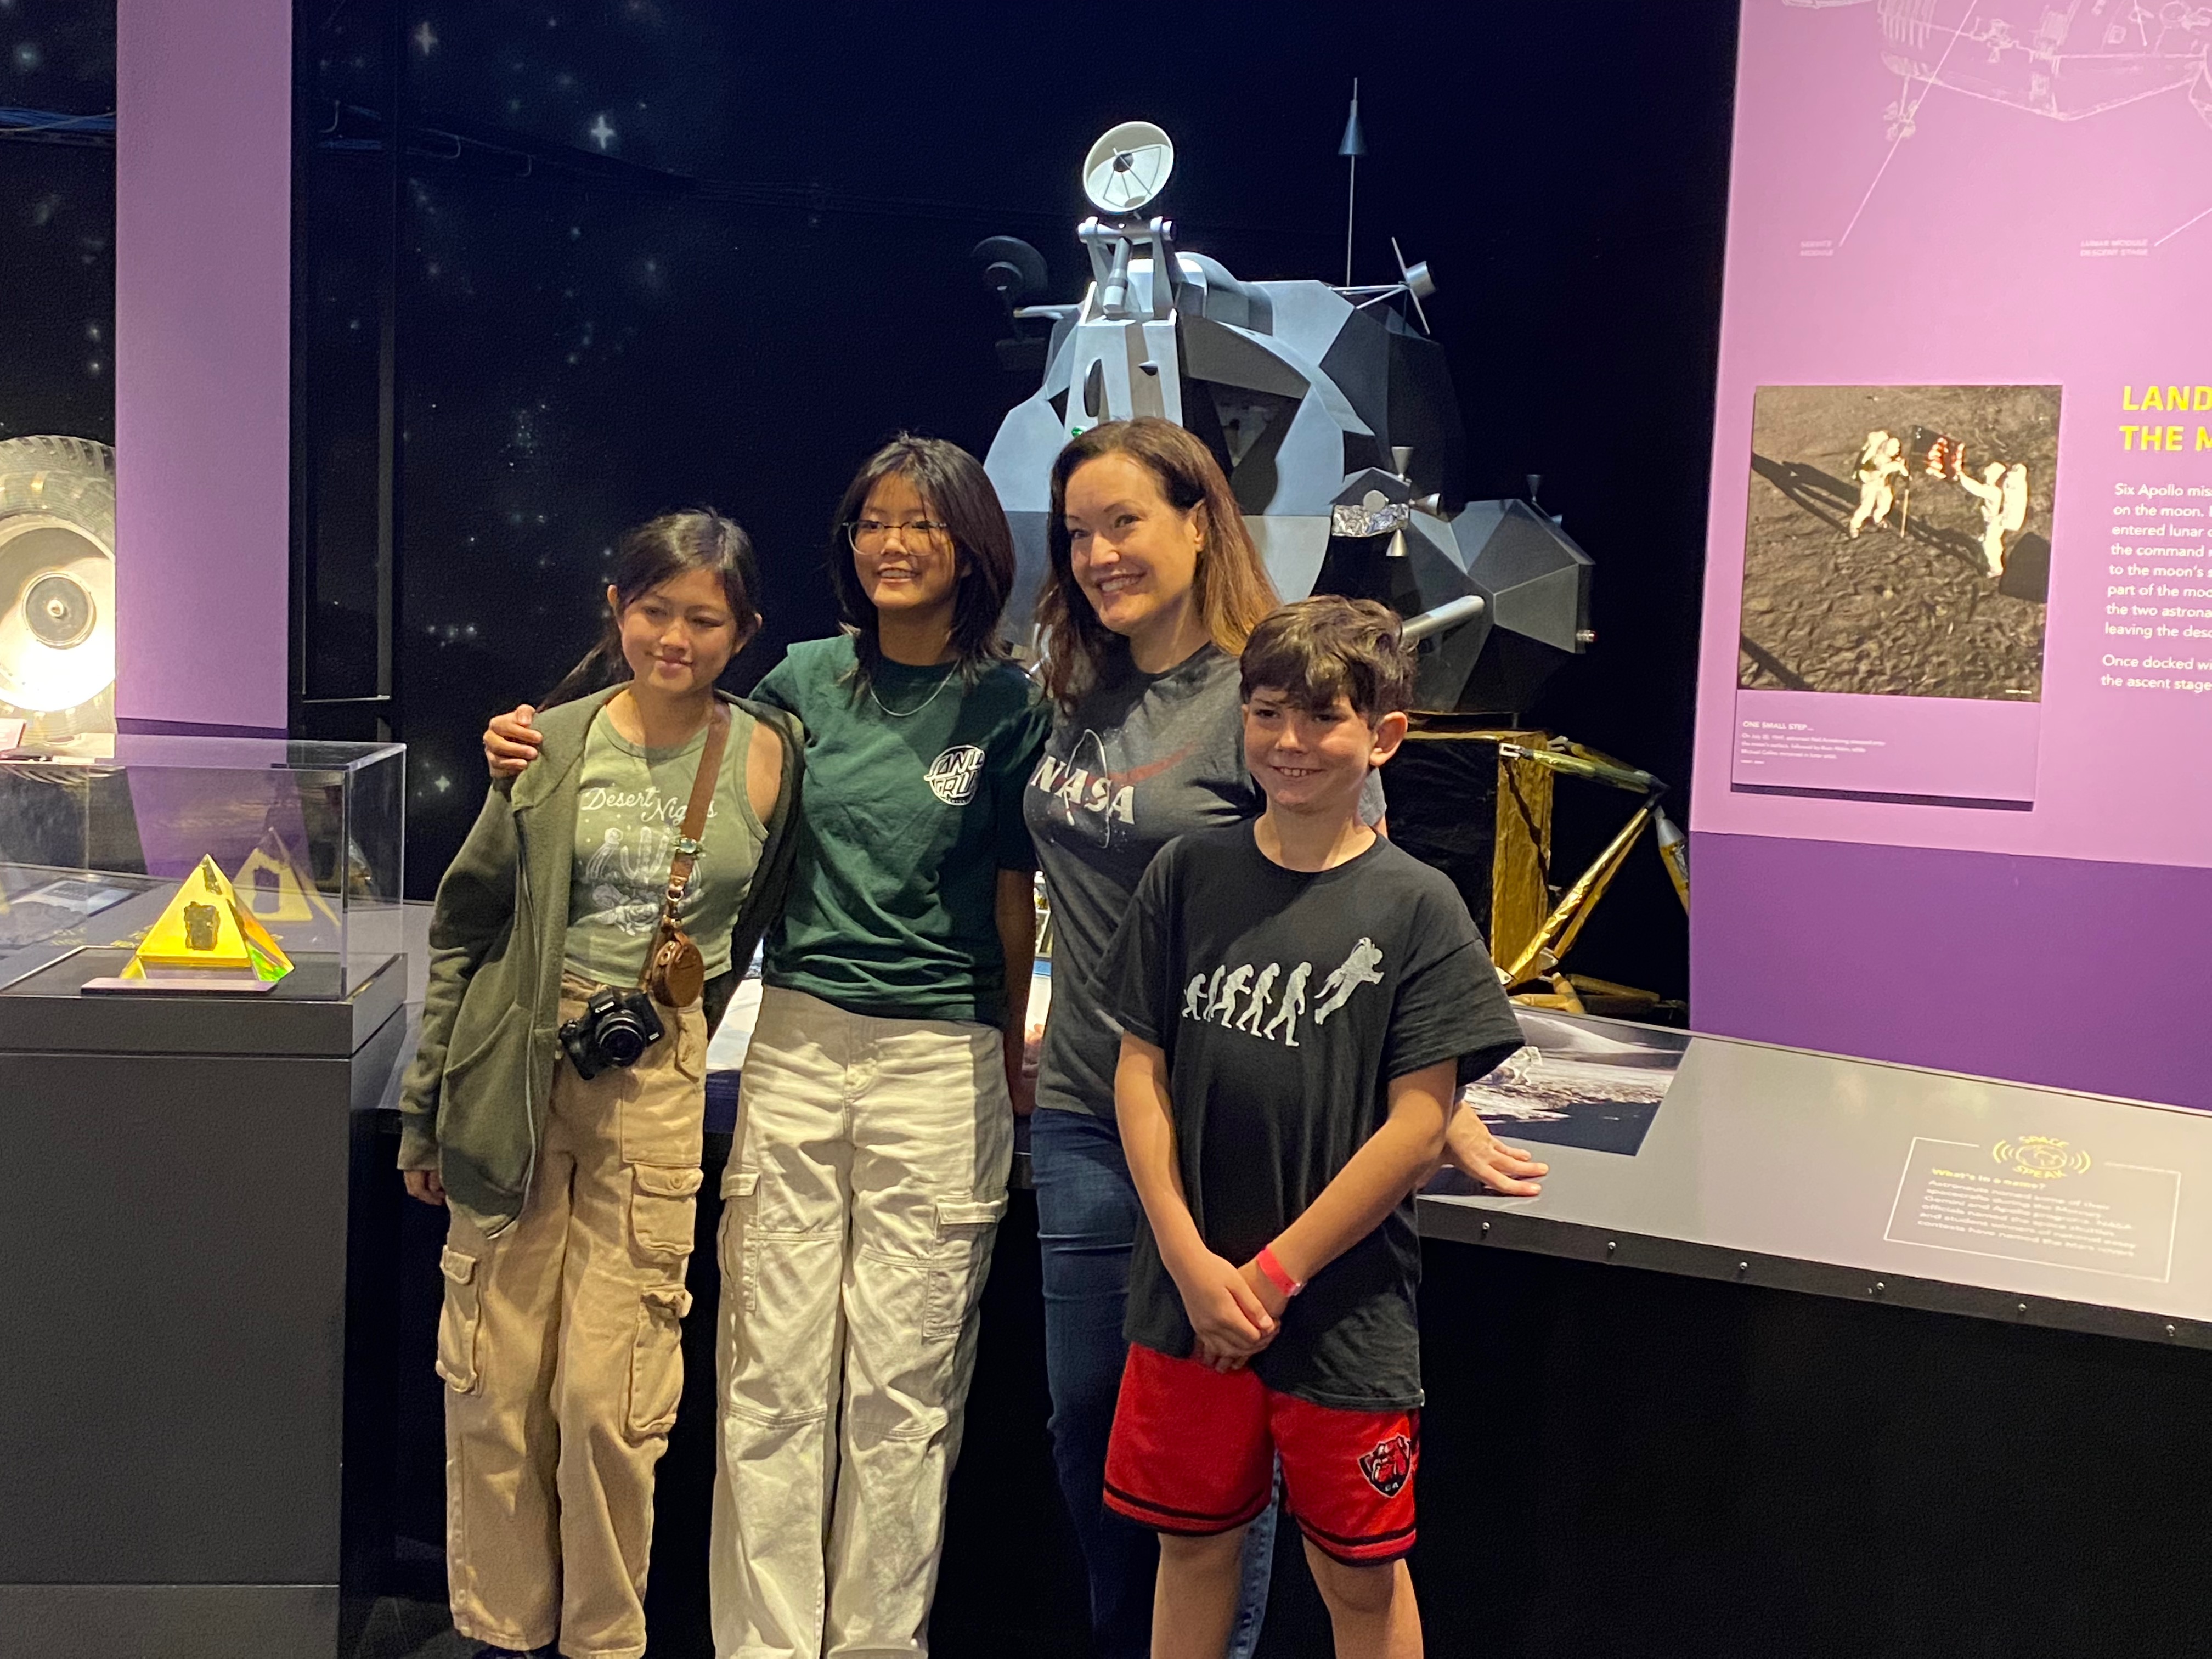 Three kids and a woman stand close together with big smiles in front of a museum display.